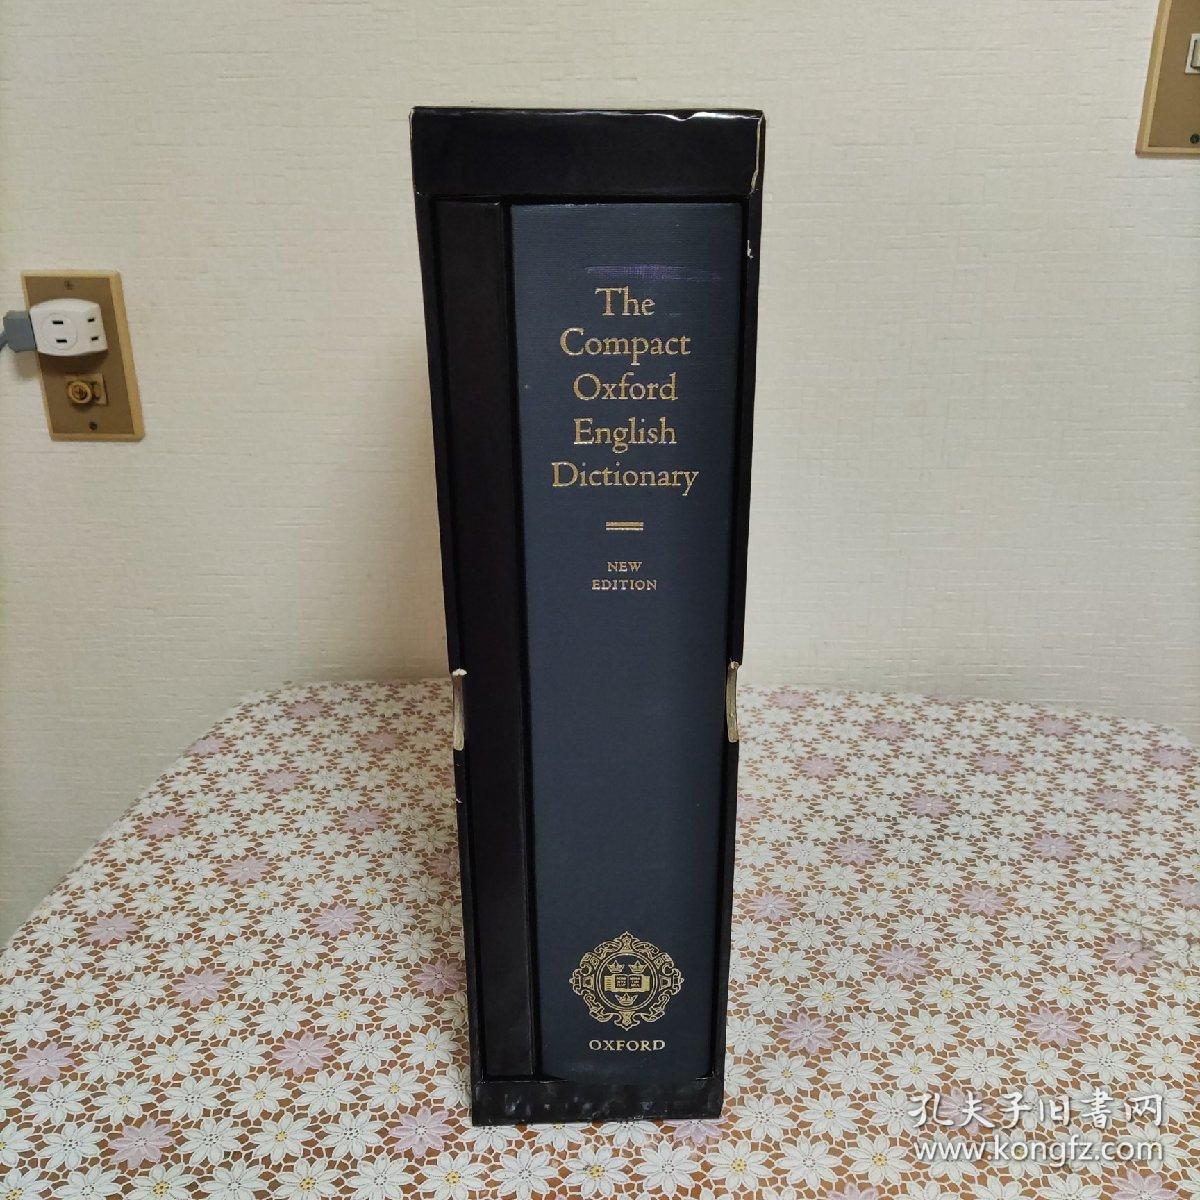 the compact Oxford English Dictionary
牛津英语大词典